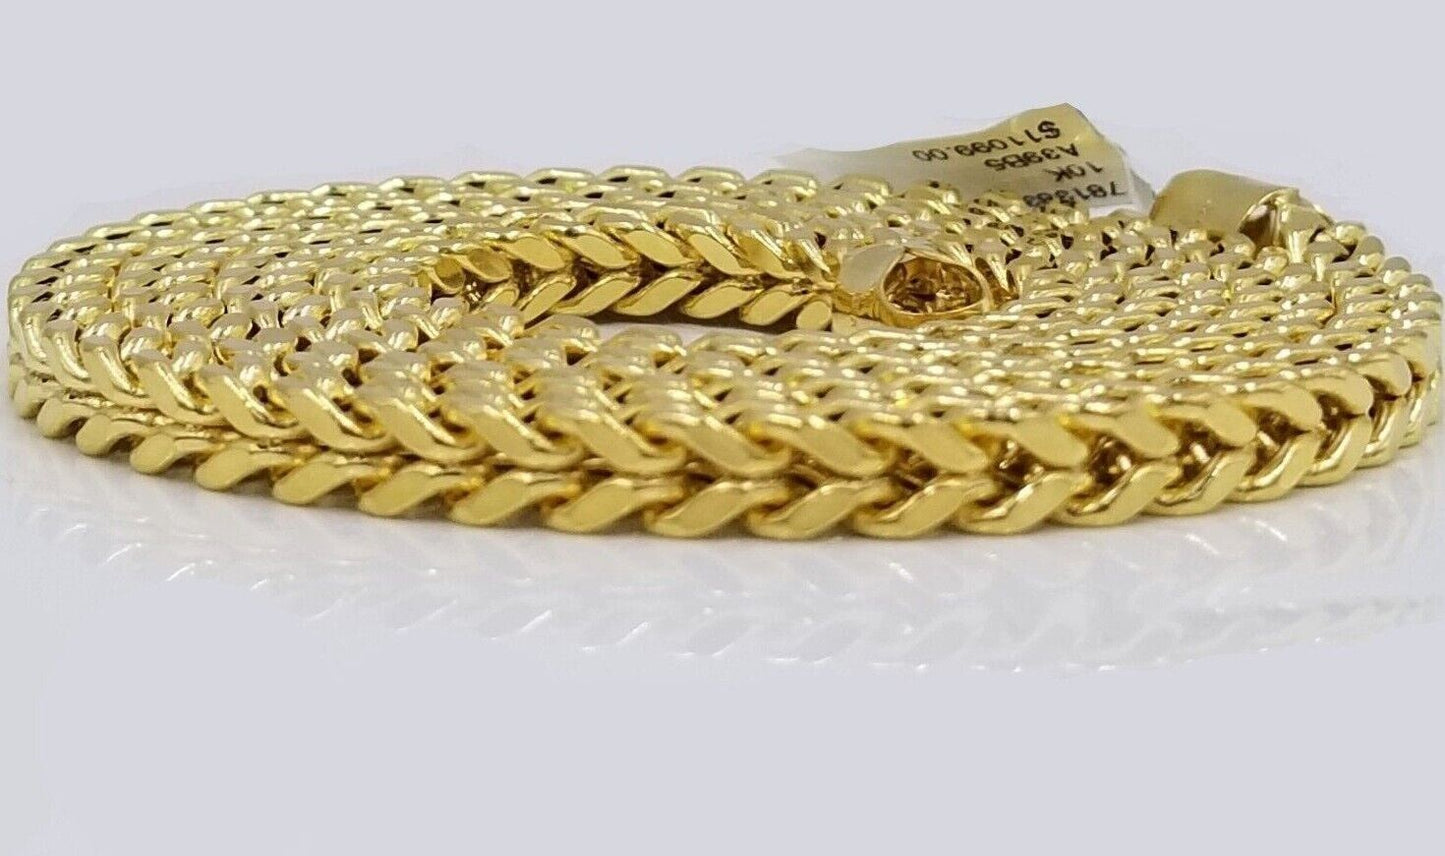 Real 10k Yellow Gold Franco Necklace 5mm 20" inch Short length Men's 10kt Chain